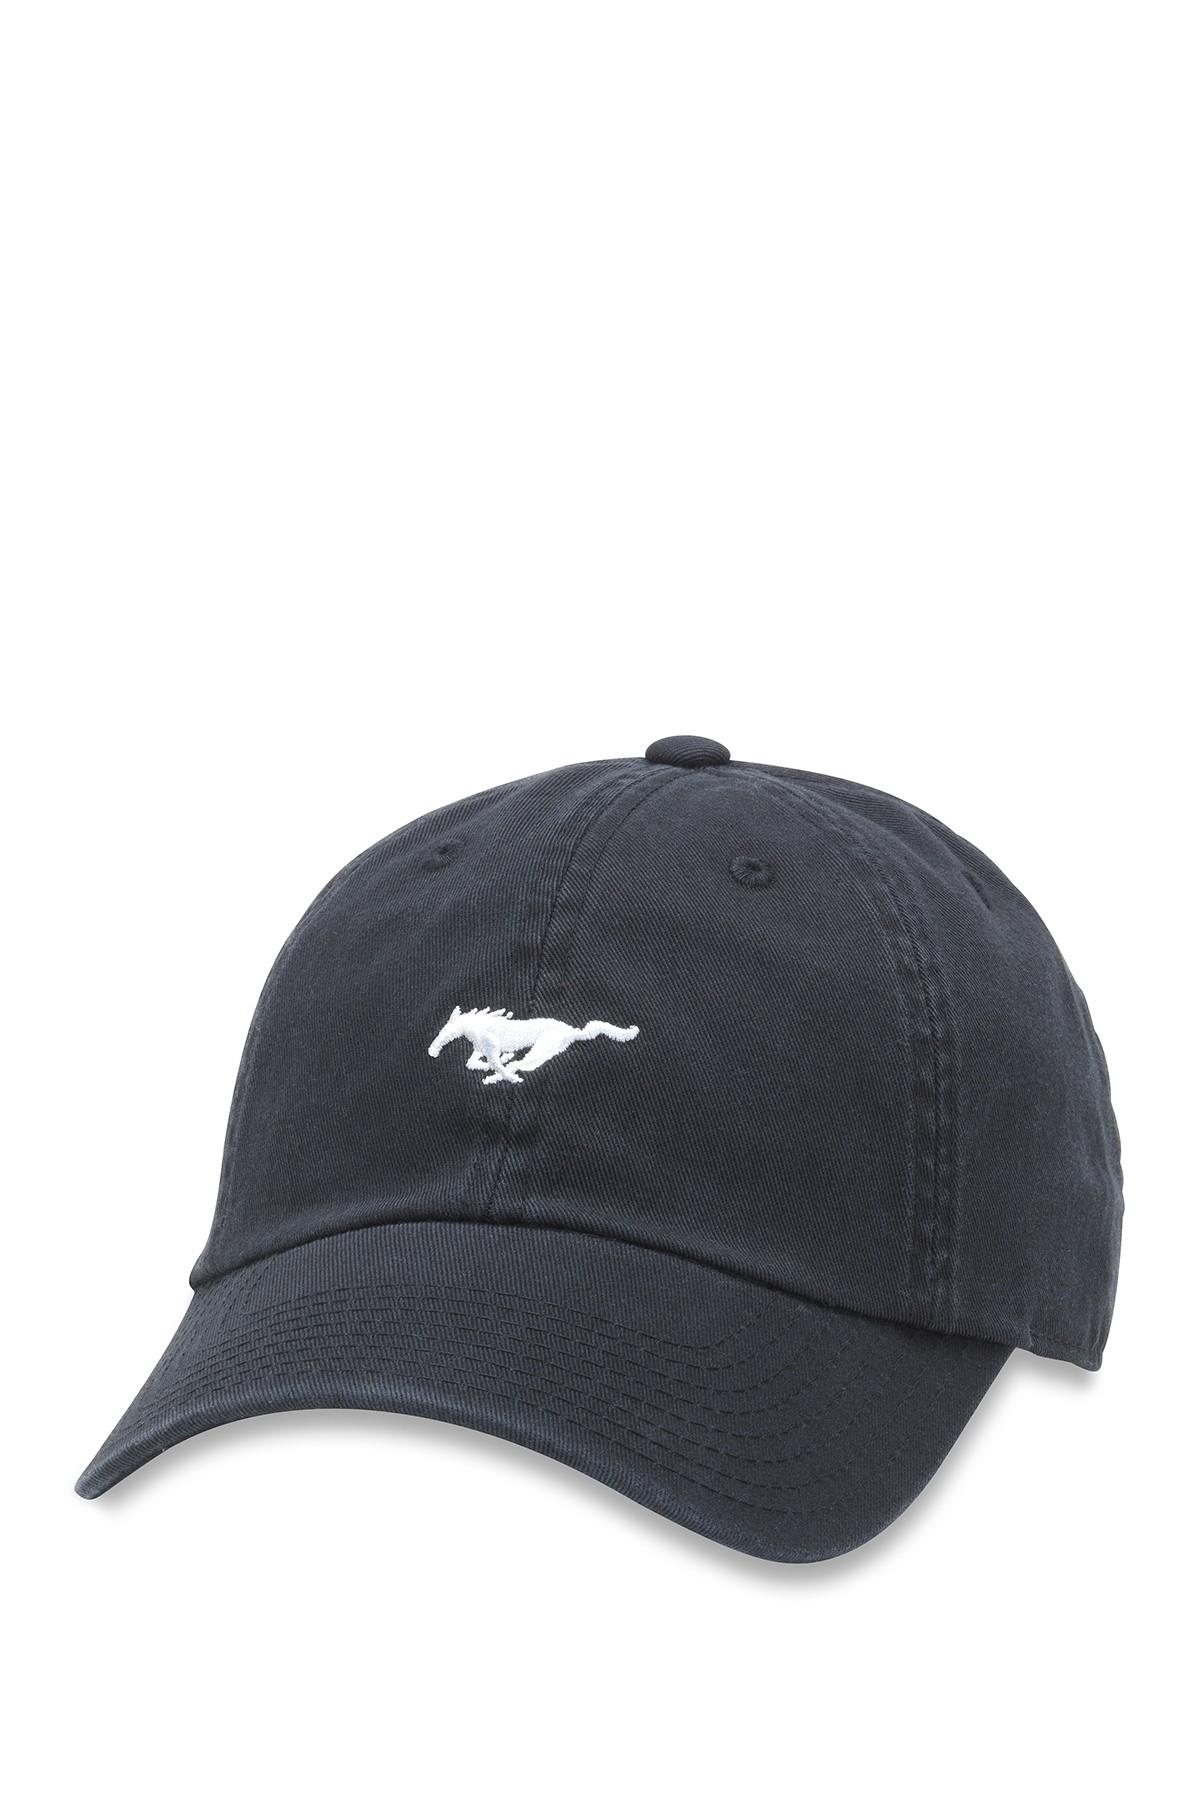 | for in Baseball Ford American Black Men Needle Micro Lyst Mustang Cap Embroidered